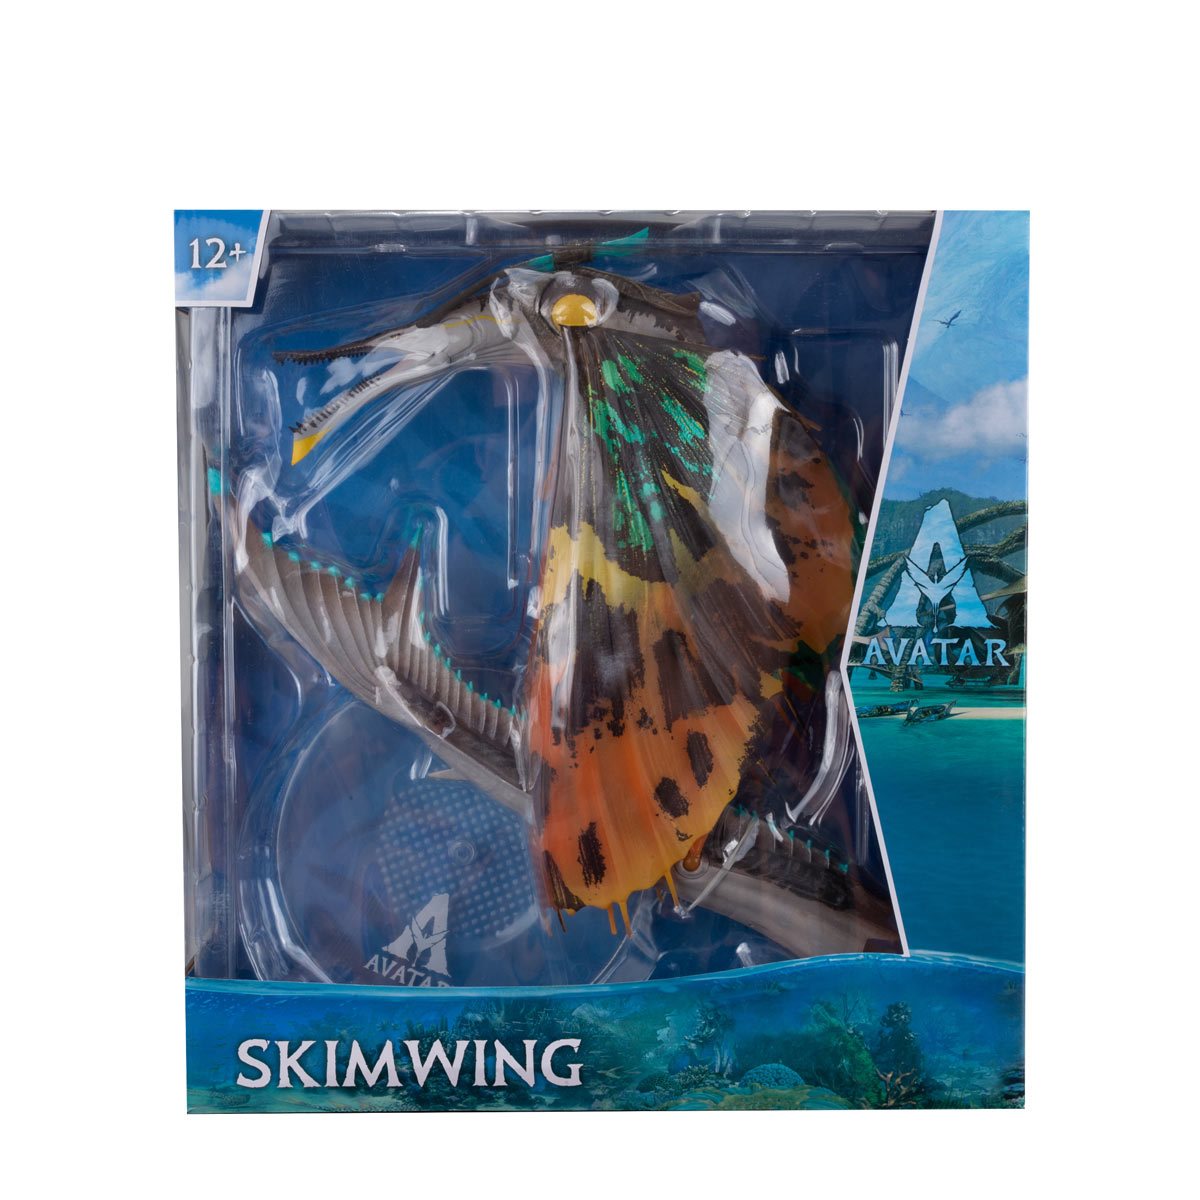 7-in scale Skimwing 4